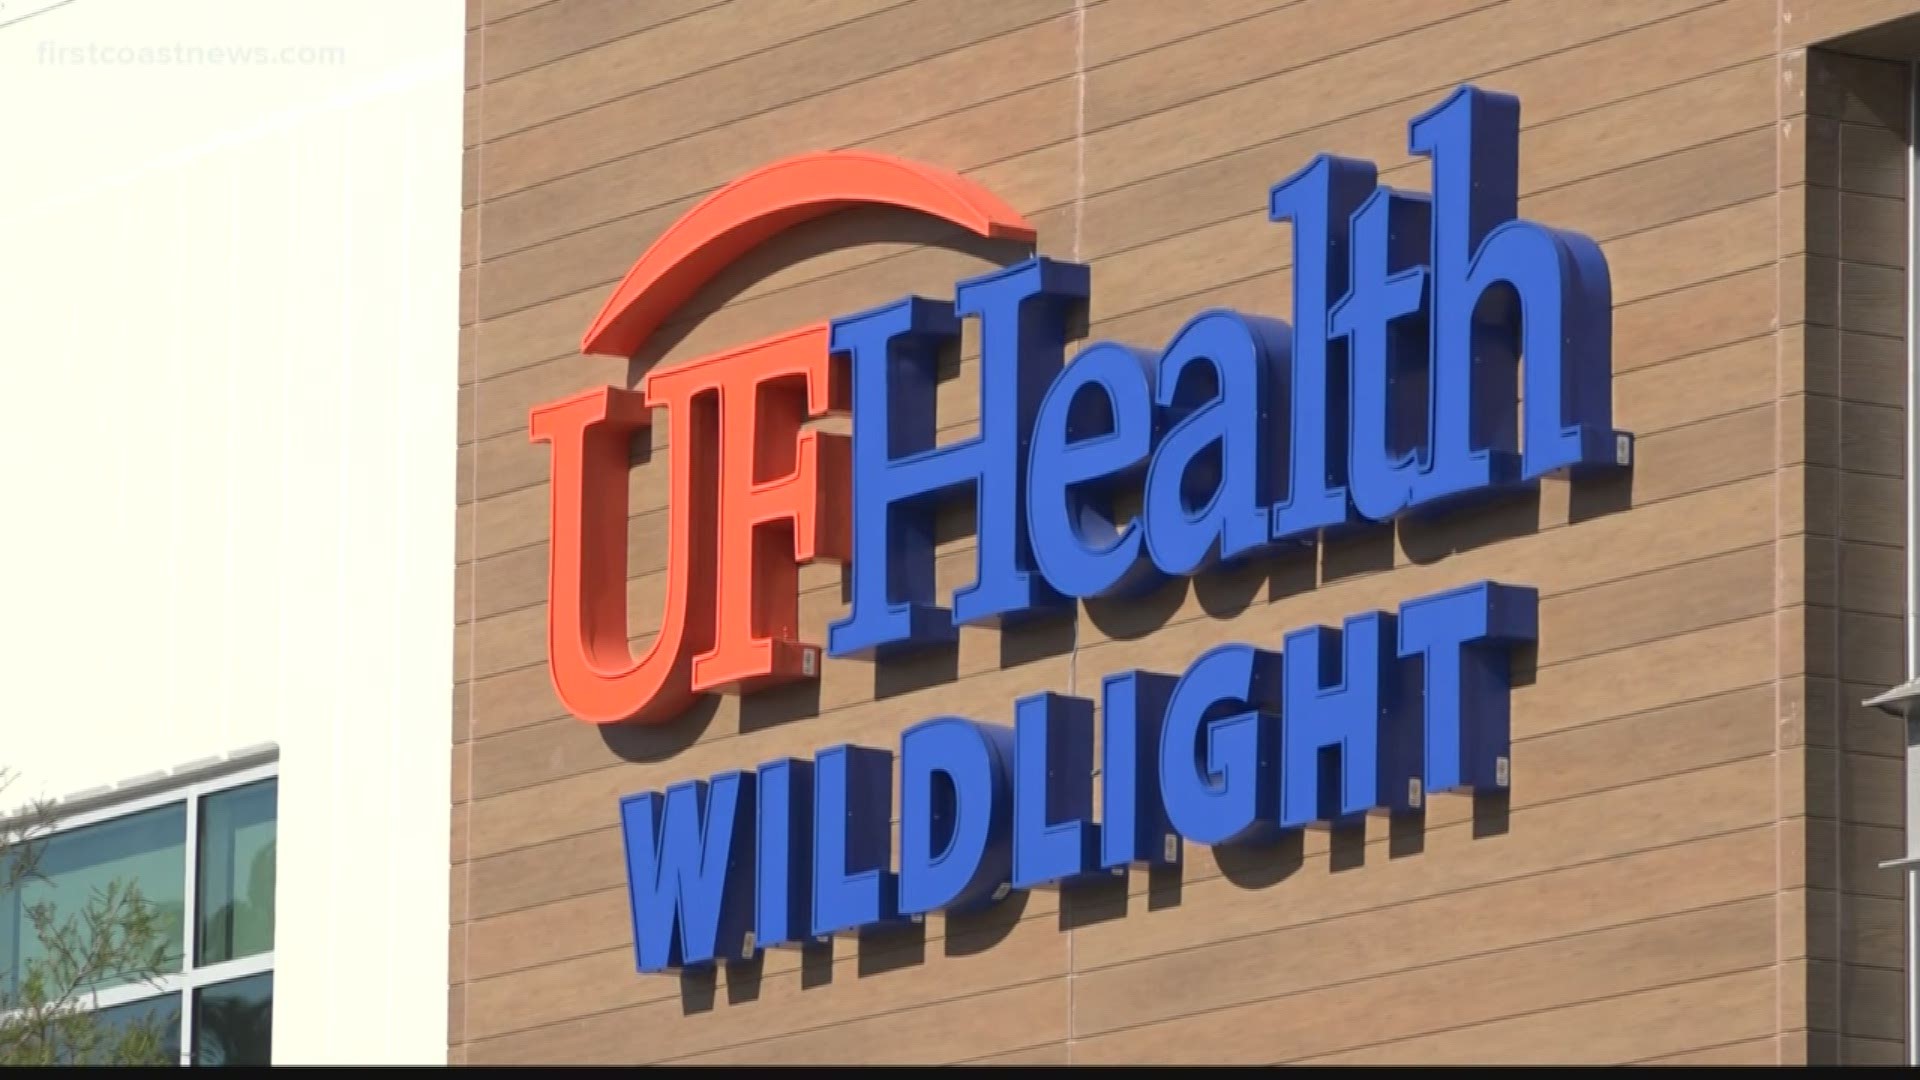 UF Health officials held a ribbon cutting on Friday morning their new office in Wildlight. The new building will include an urgent care and primary care.